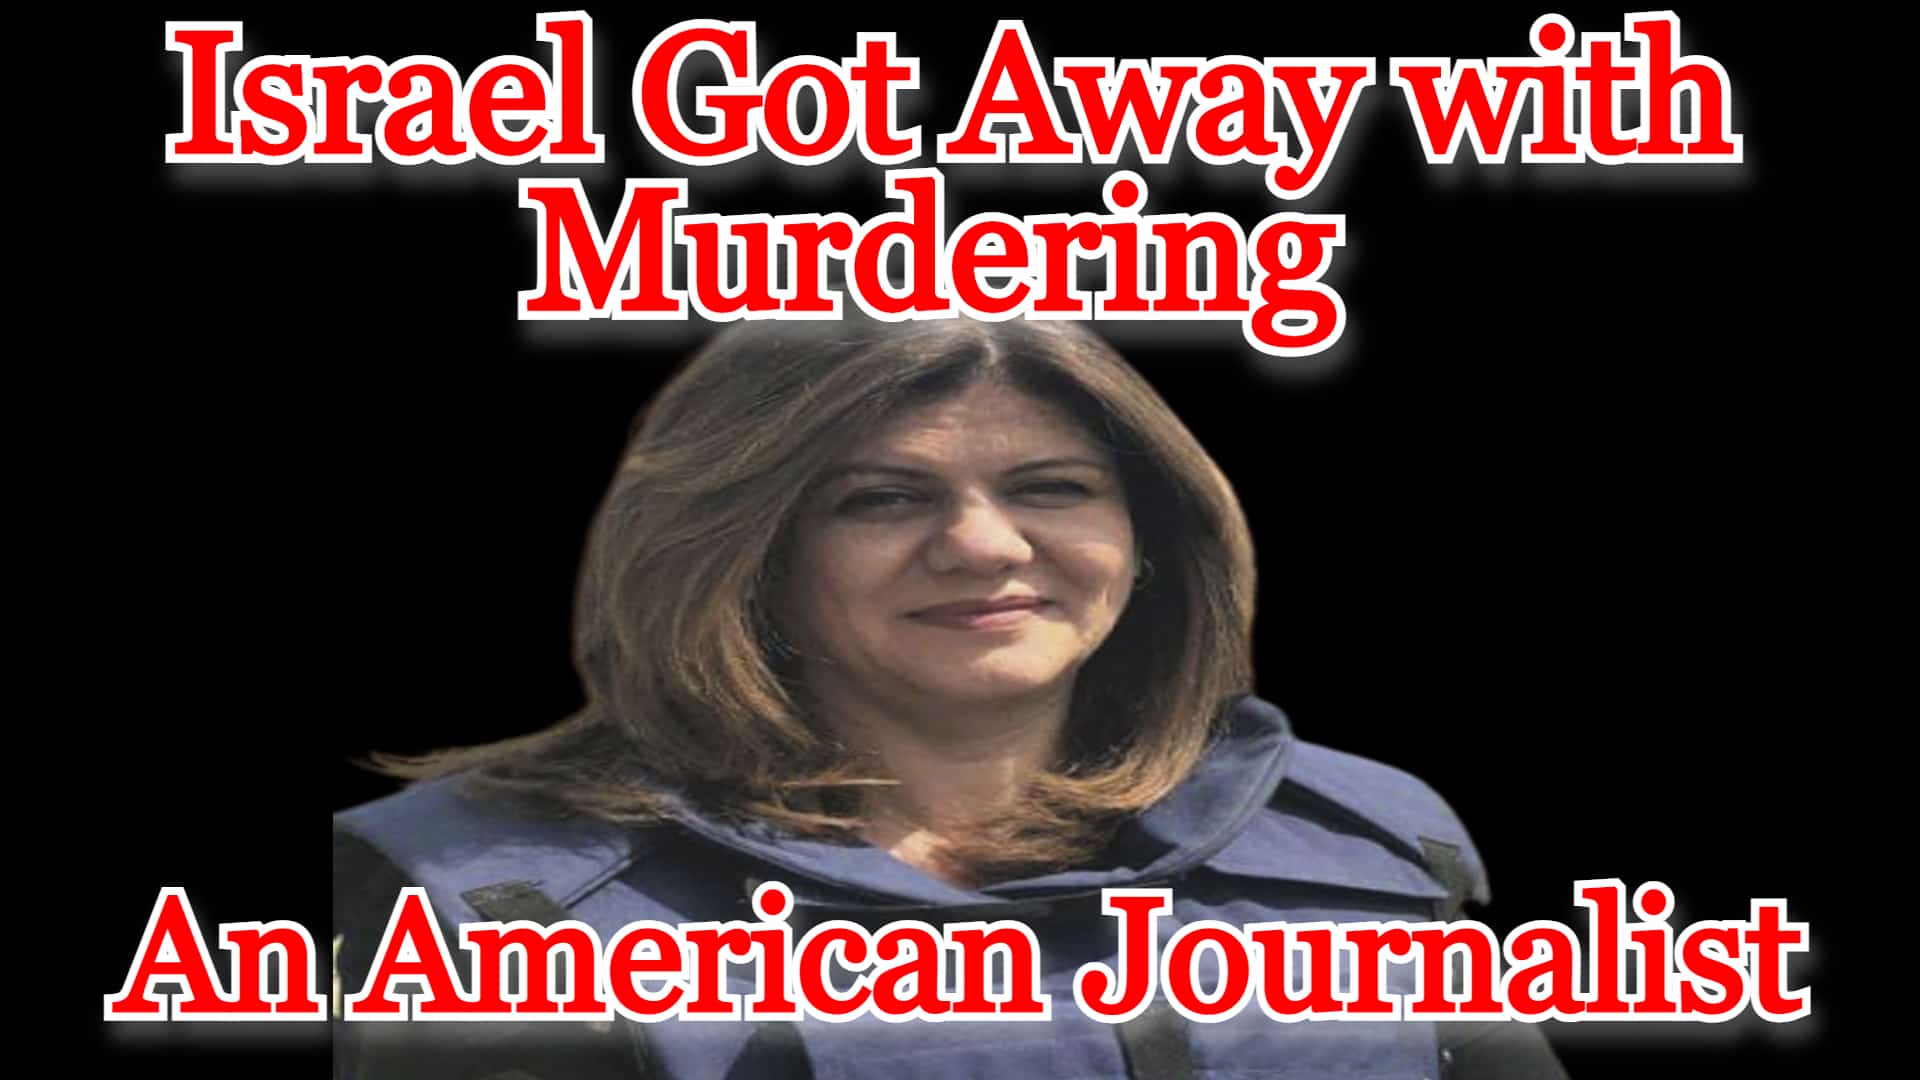 Israel Got Away with Murdering an American Journalist: COI #328